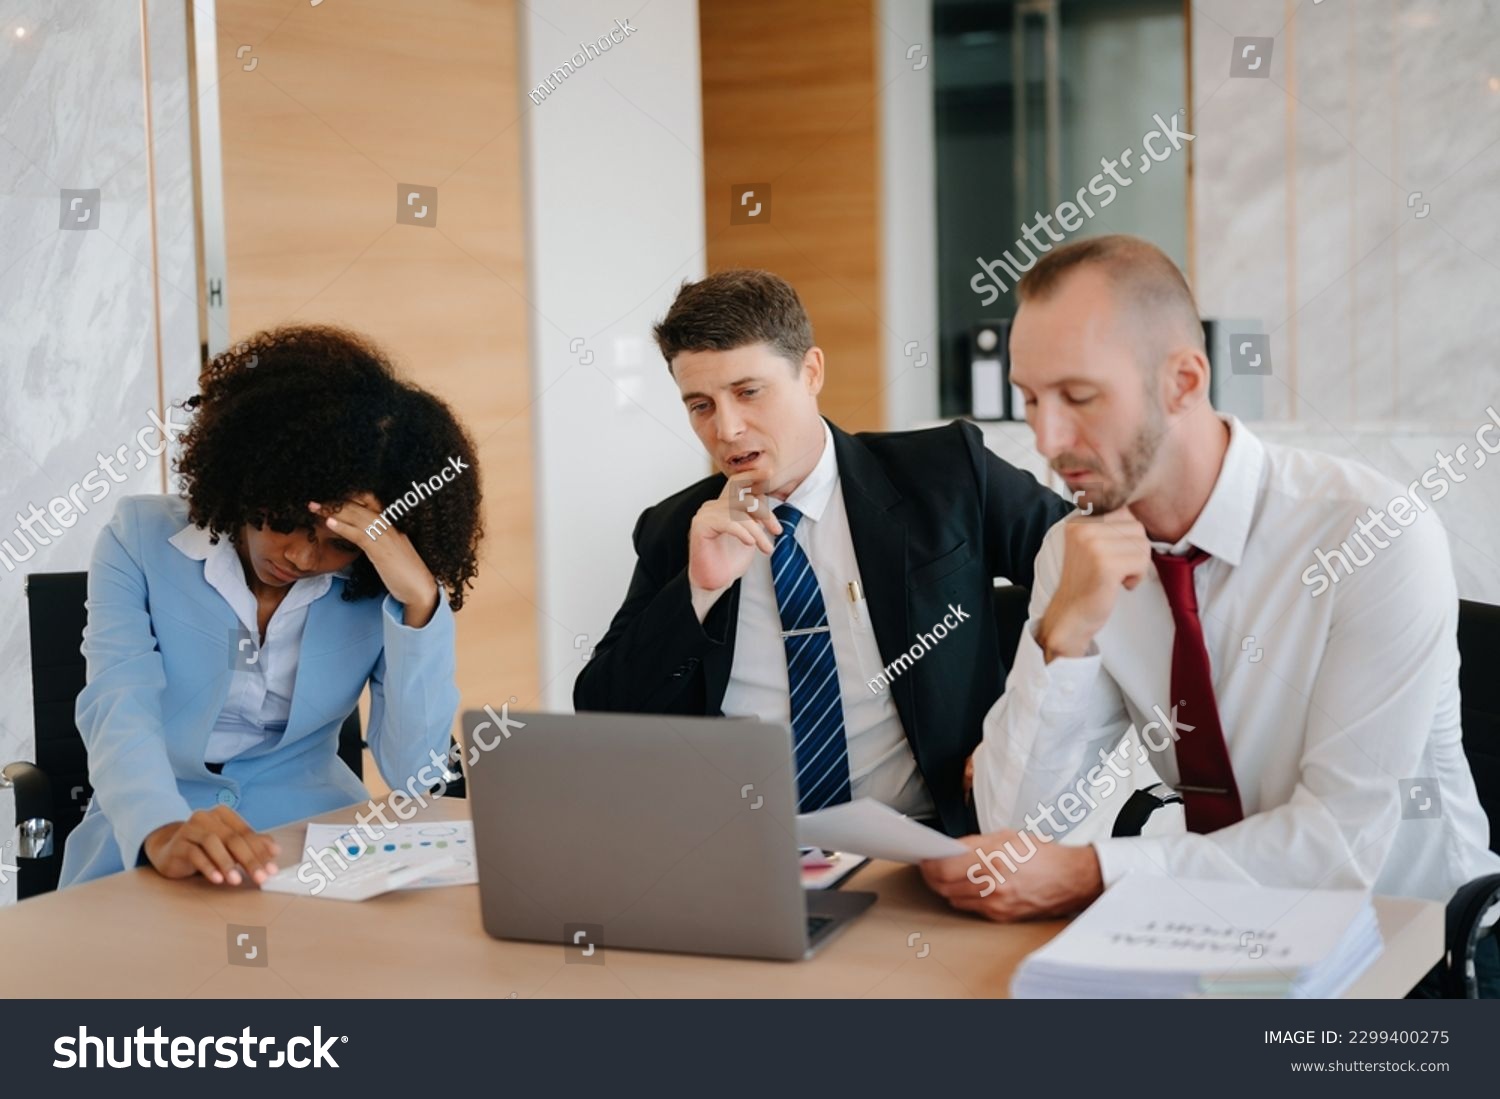 Team thinking of problem solution at modern office meeting, sad diverse business people group shocked by bad news, upset colleagues in panic after company bankruptcy concept #2299400275